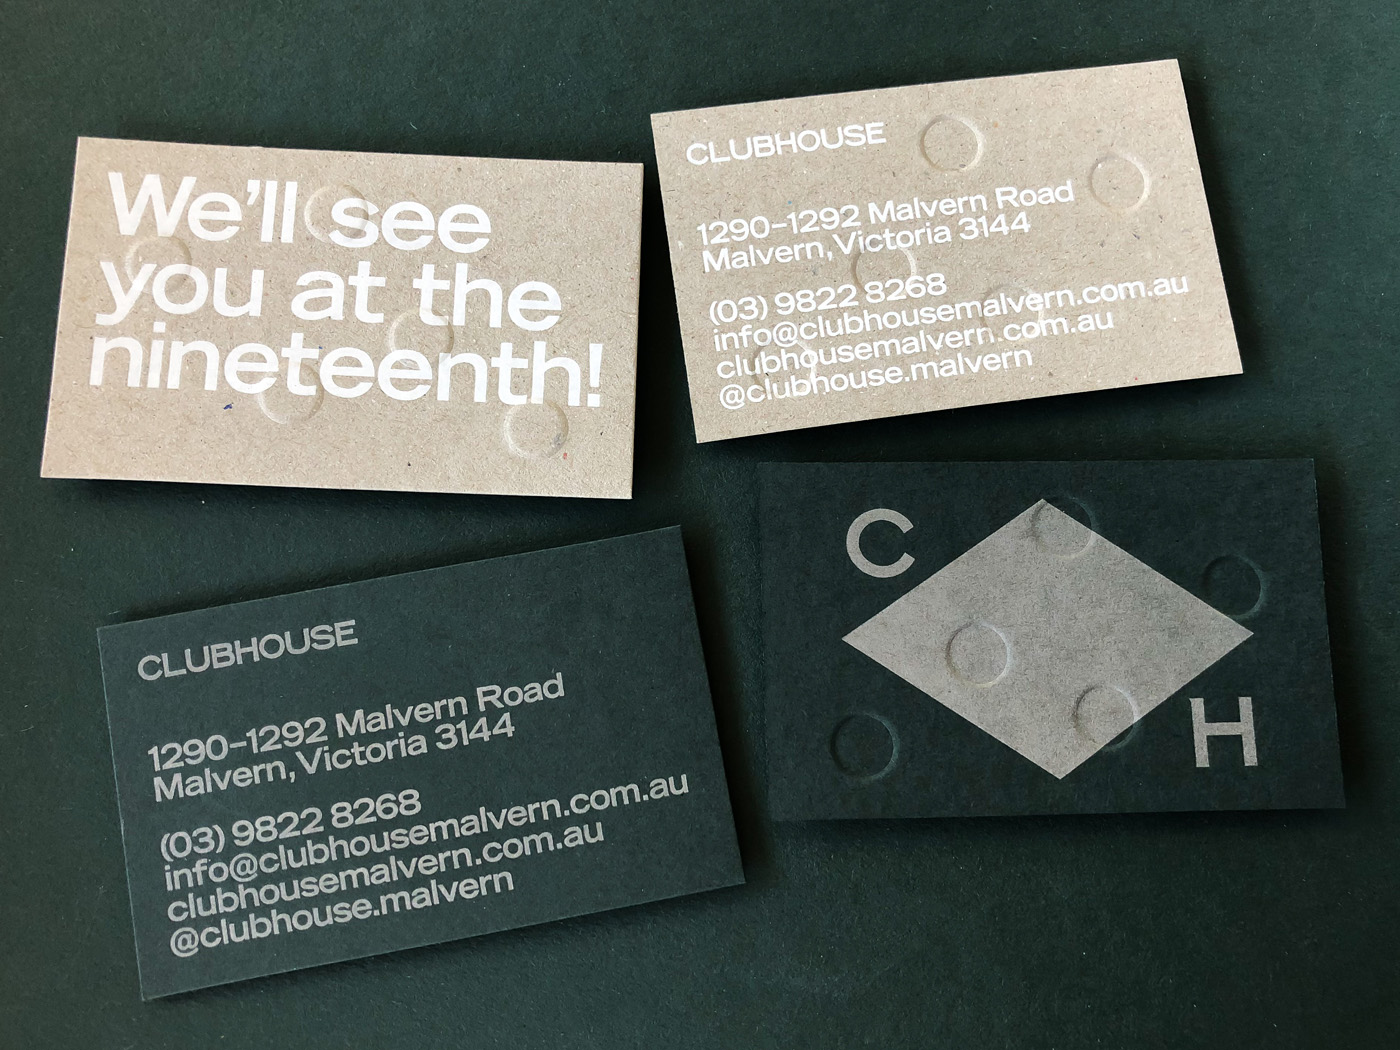 Foil embossed debossed letterpress business cards for Clubhouse on Colorplan and Boxboard